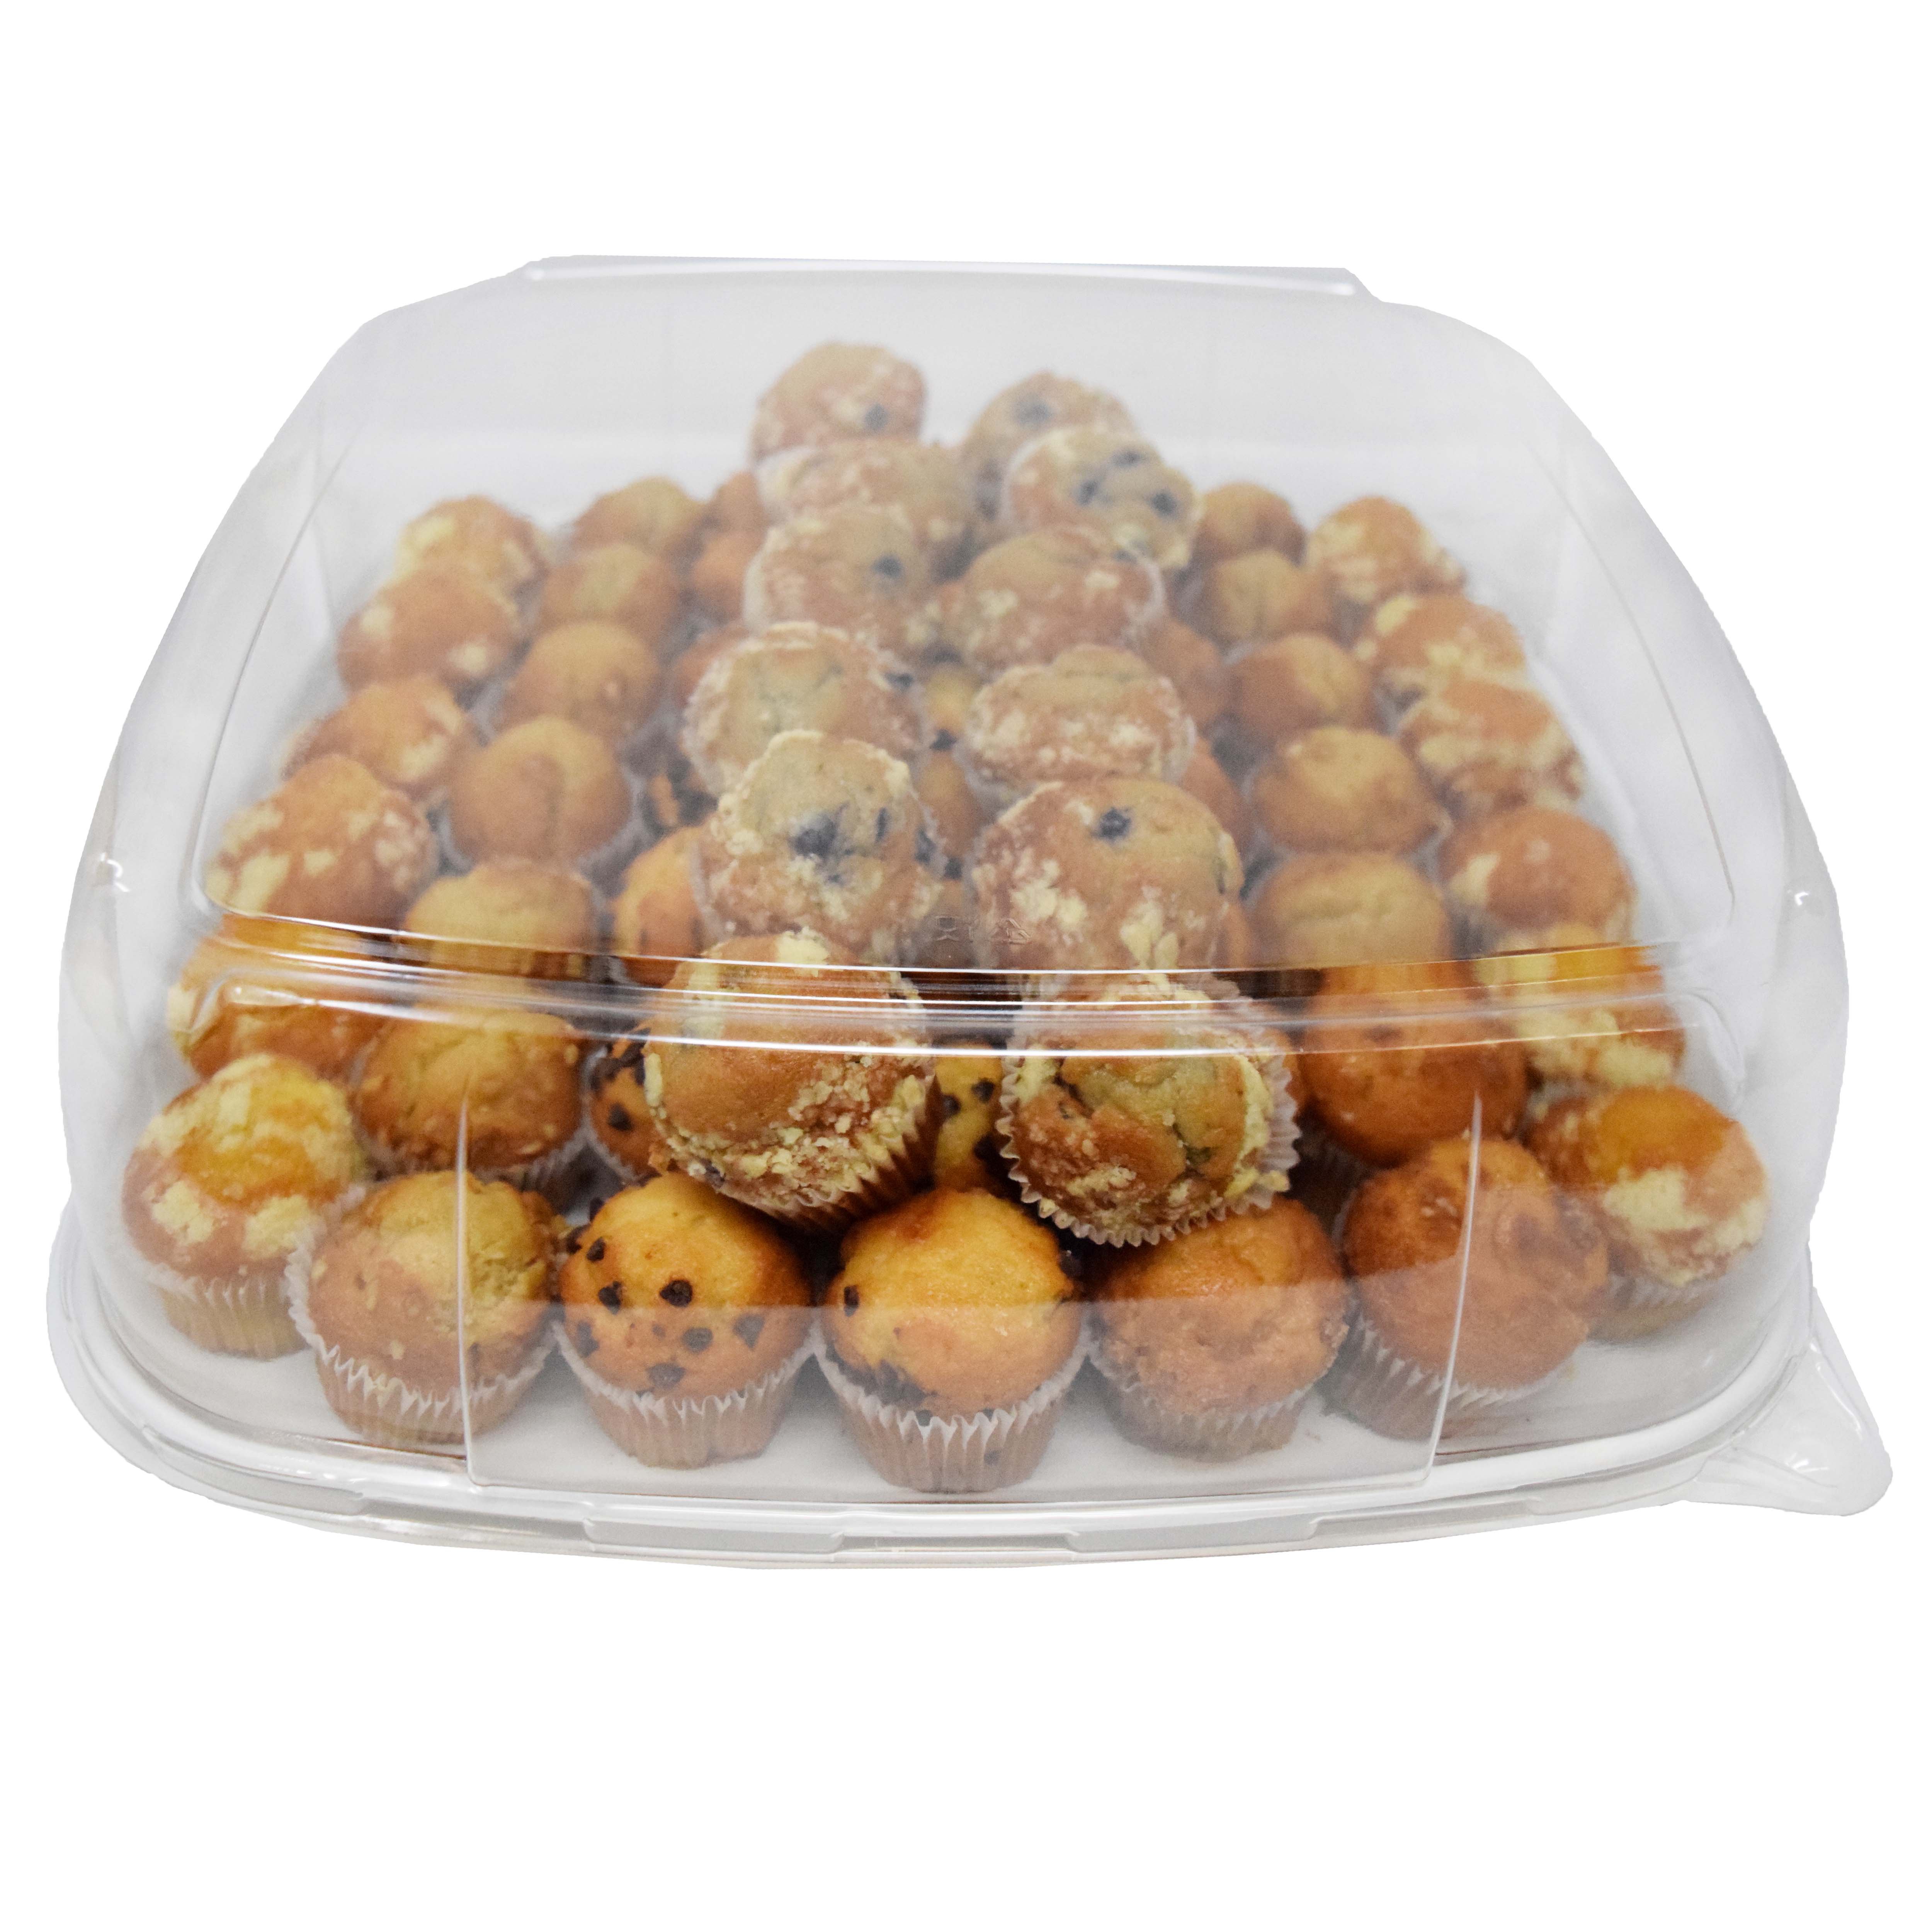 H-E-B Bakery Party Tray - Mini Muffins - Shop Standard Party Trays at H-E-B